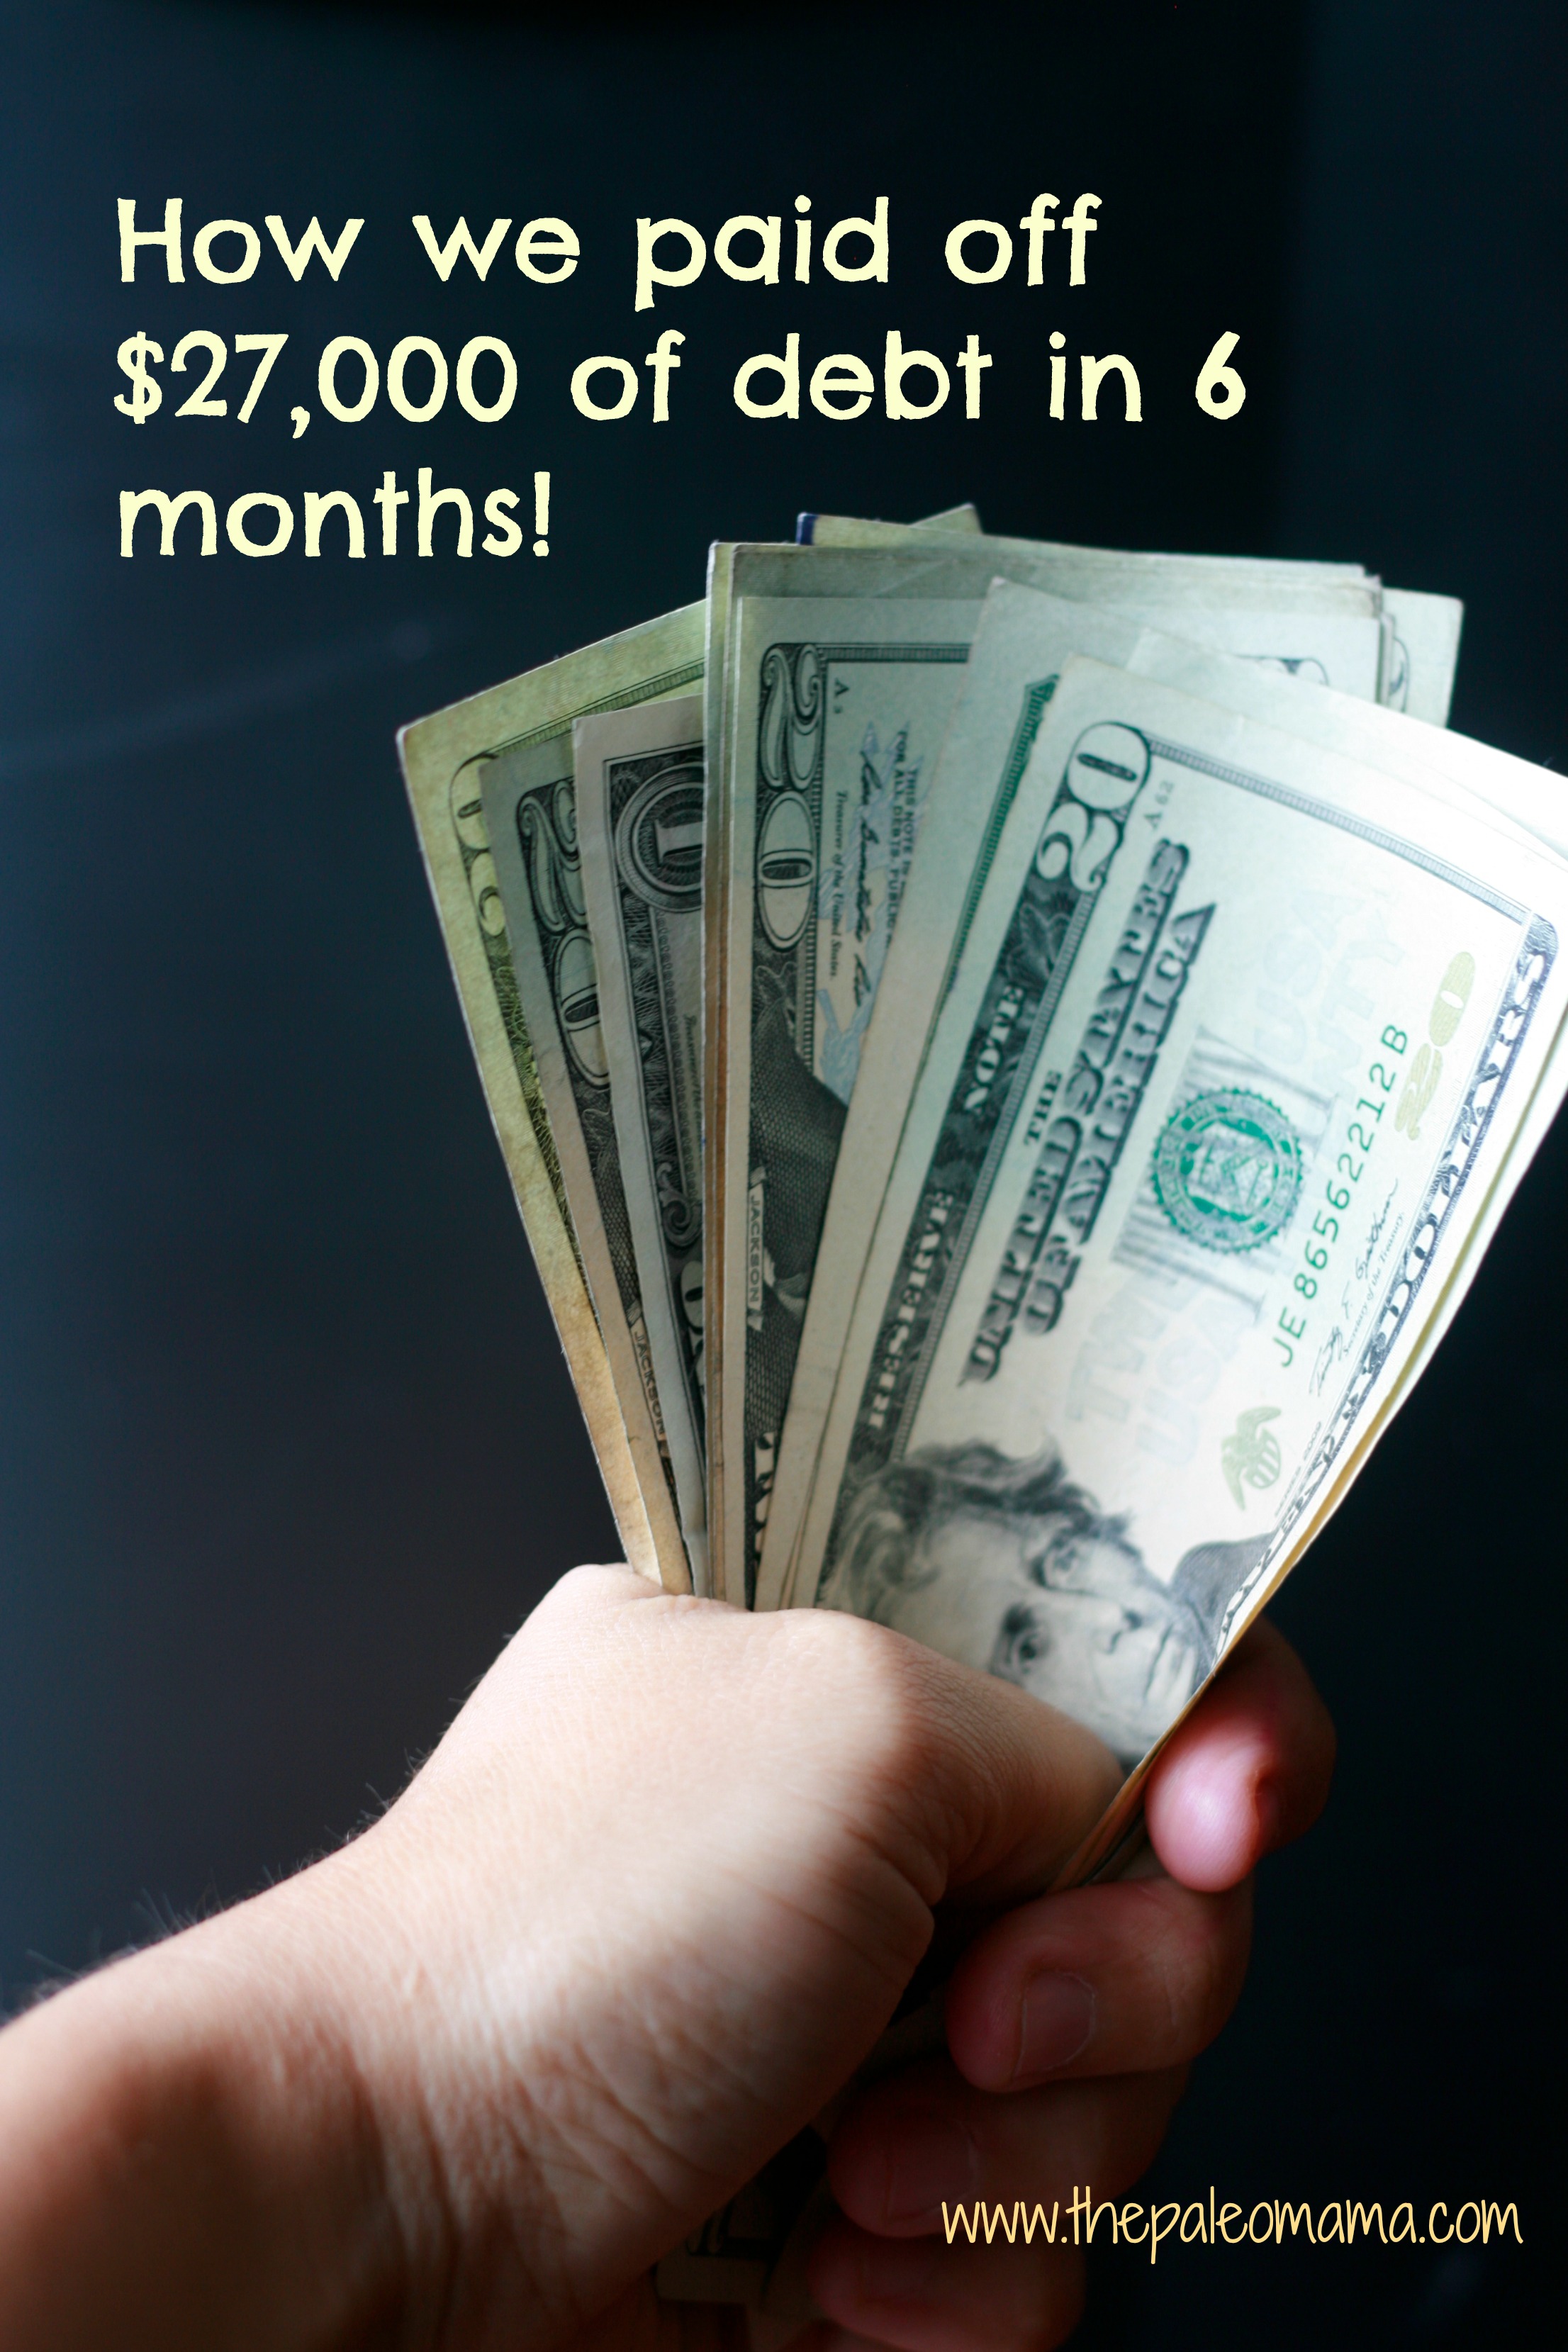 How We Paid Off More Than $27,000 of Debt in 6 Months…and Still Ate Paleo!